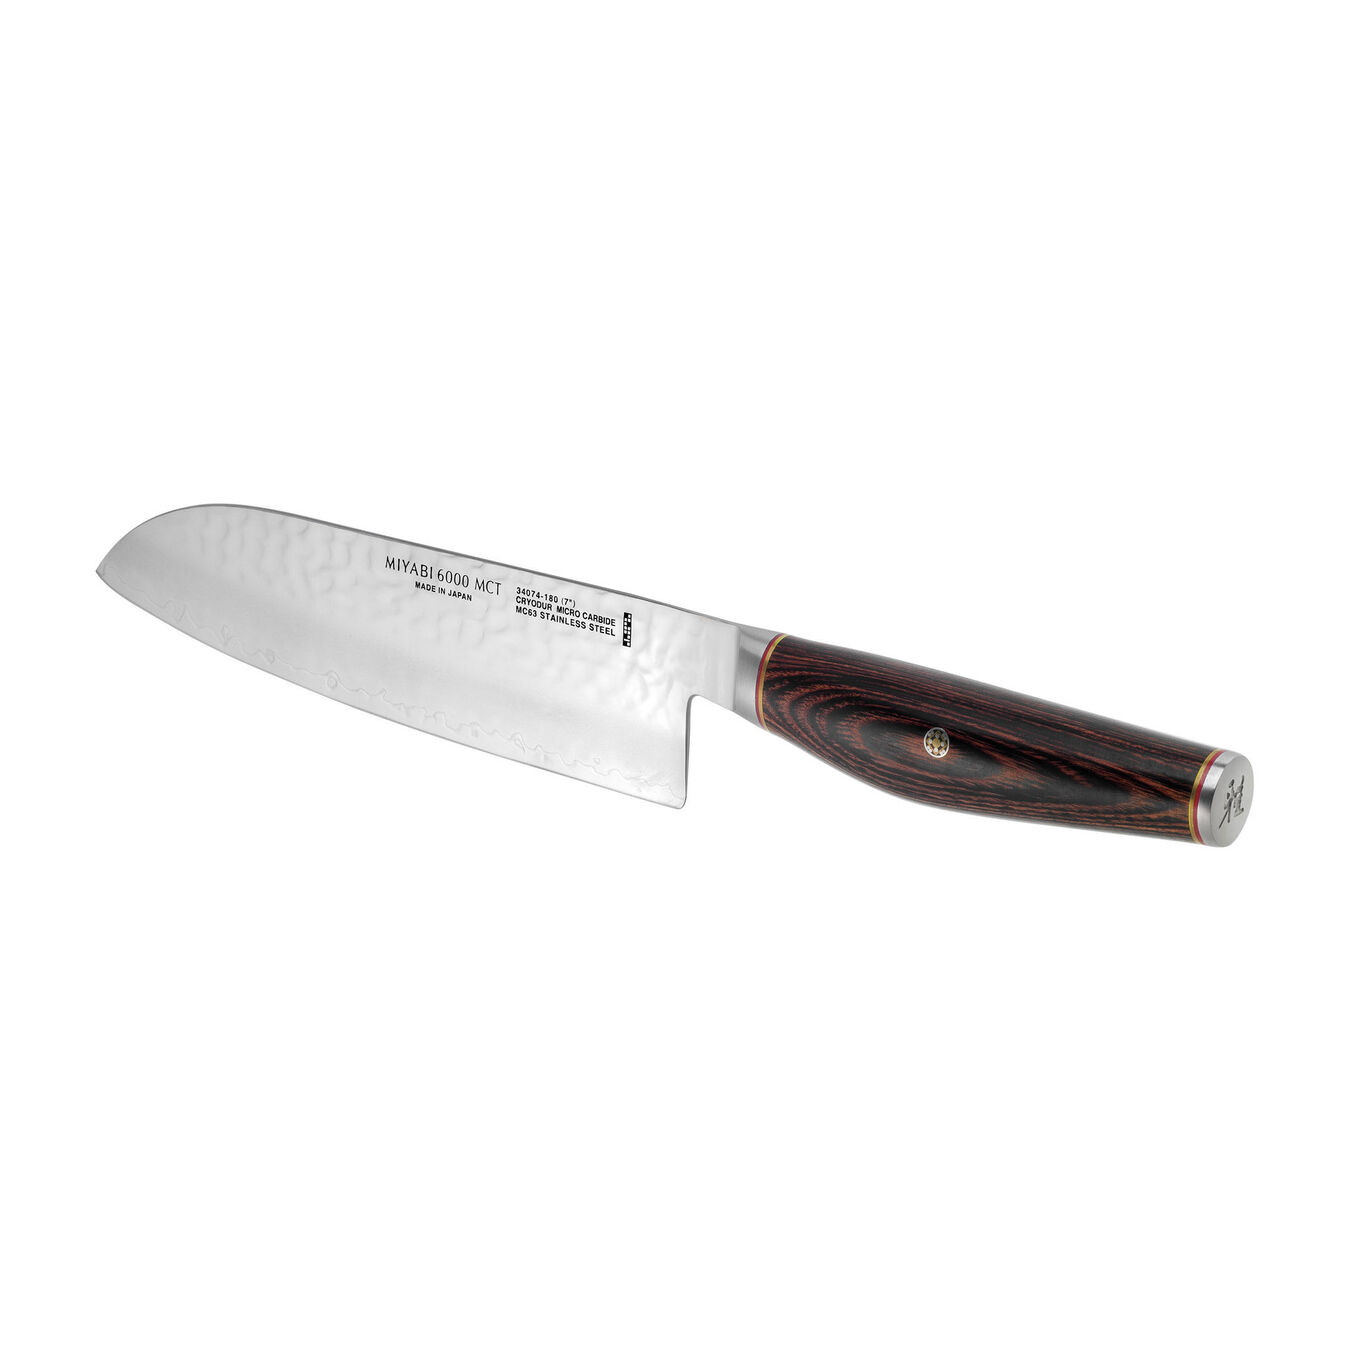 7 inch Santoku - Visual Imperfections,,large 3